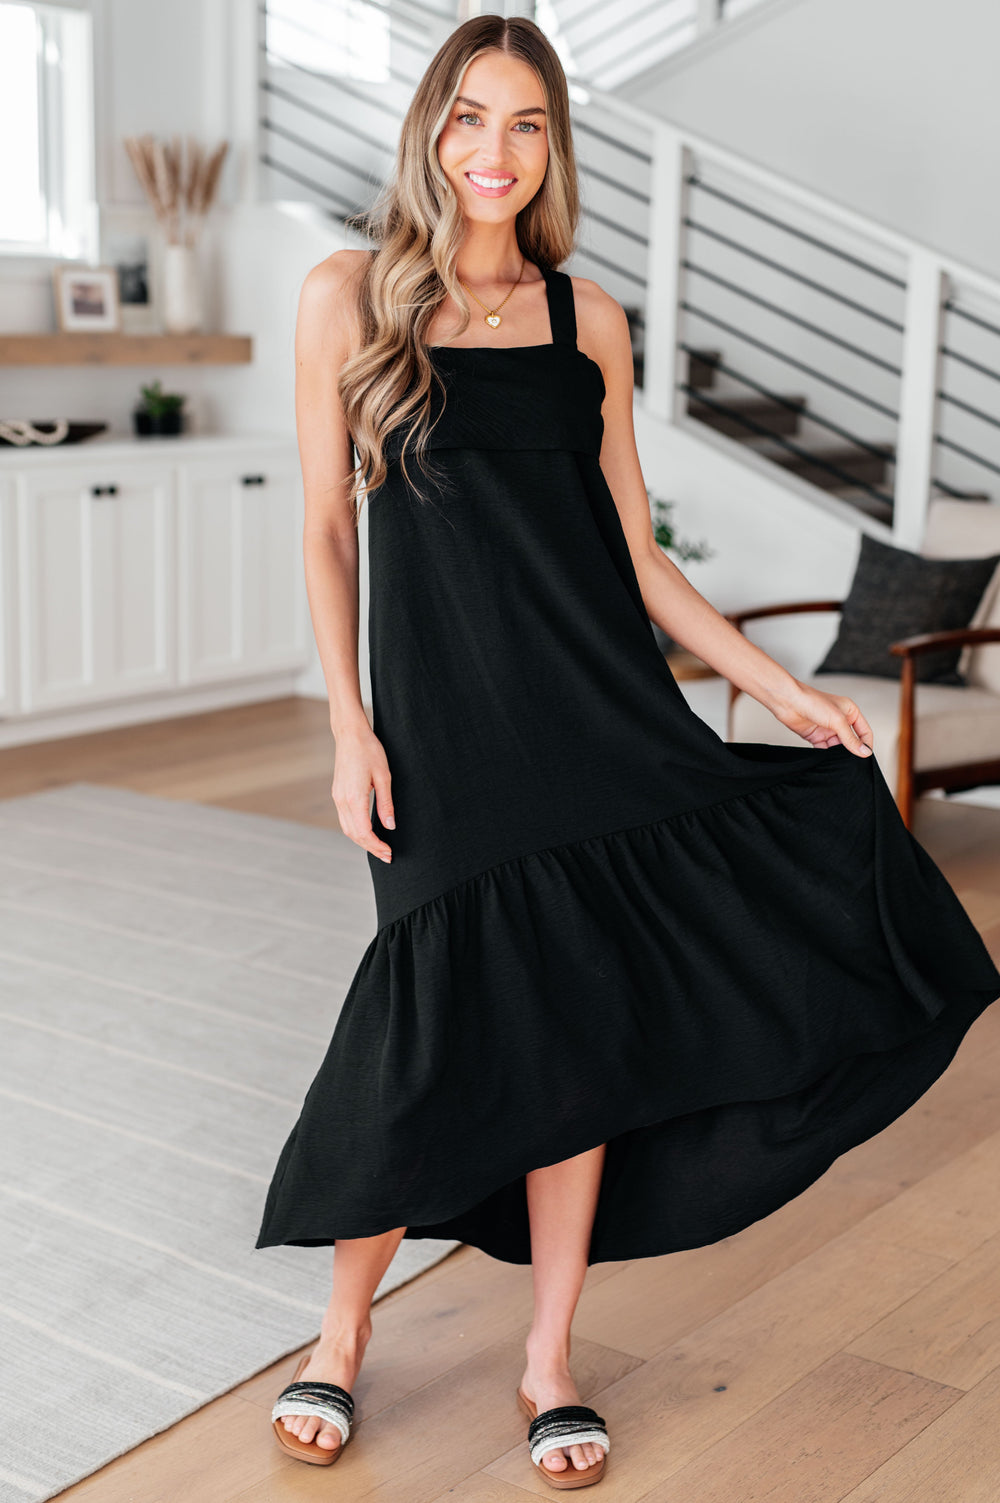 Nightlife Tie Back Maxi Dress-Dresses-Inspired by Justeen-Women's Clothing Boutique in Chicago, Illinois